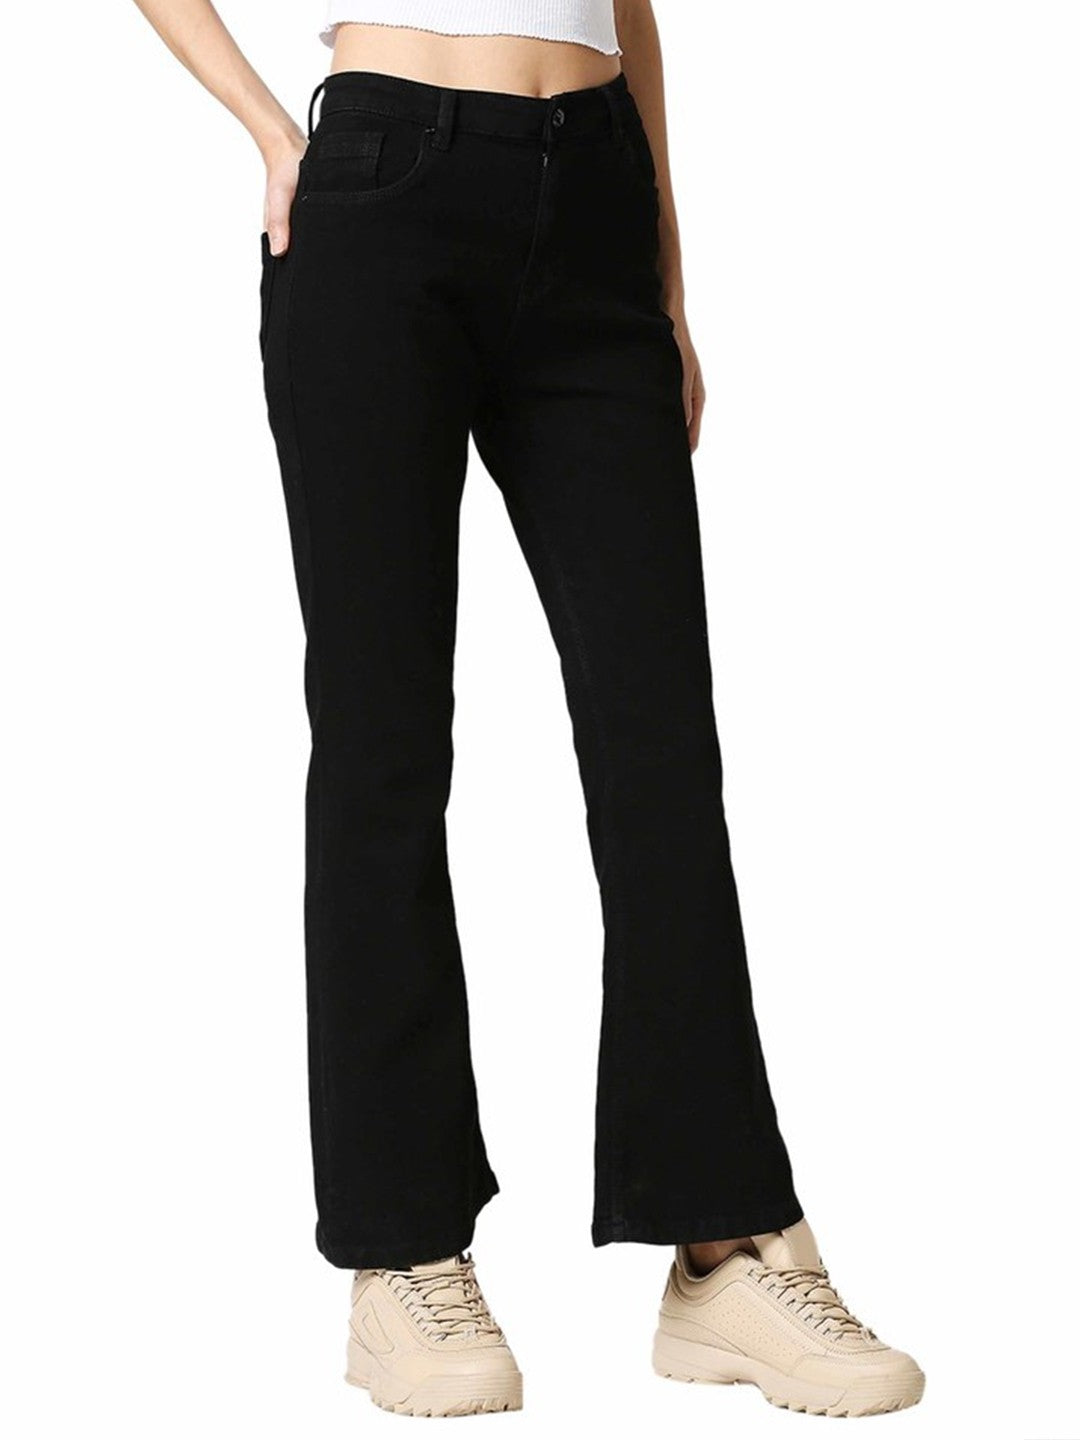 The model in the image is wearing Black Women Bootcut Denim Jeans from Alice Milan. Crafted with the finest materials and impeccable attention to detail, the Jeans looks premium, trendy, luxurious and offers unparalleled comfort. It’s a perfect clothing option for loungewear, resort wear, party wear or for an airport look. The woman in the image looks happy, and confident with her style statement putting a happy smile on her face.